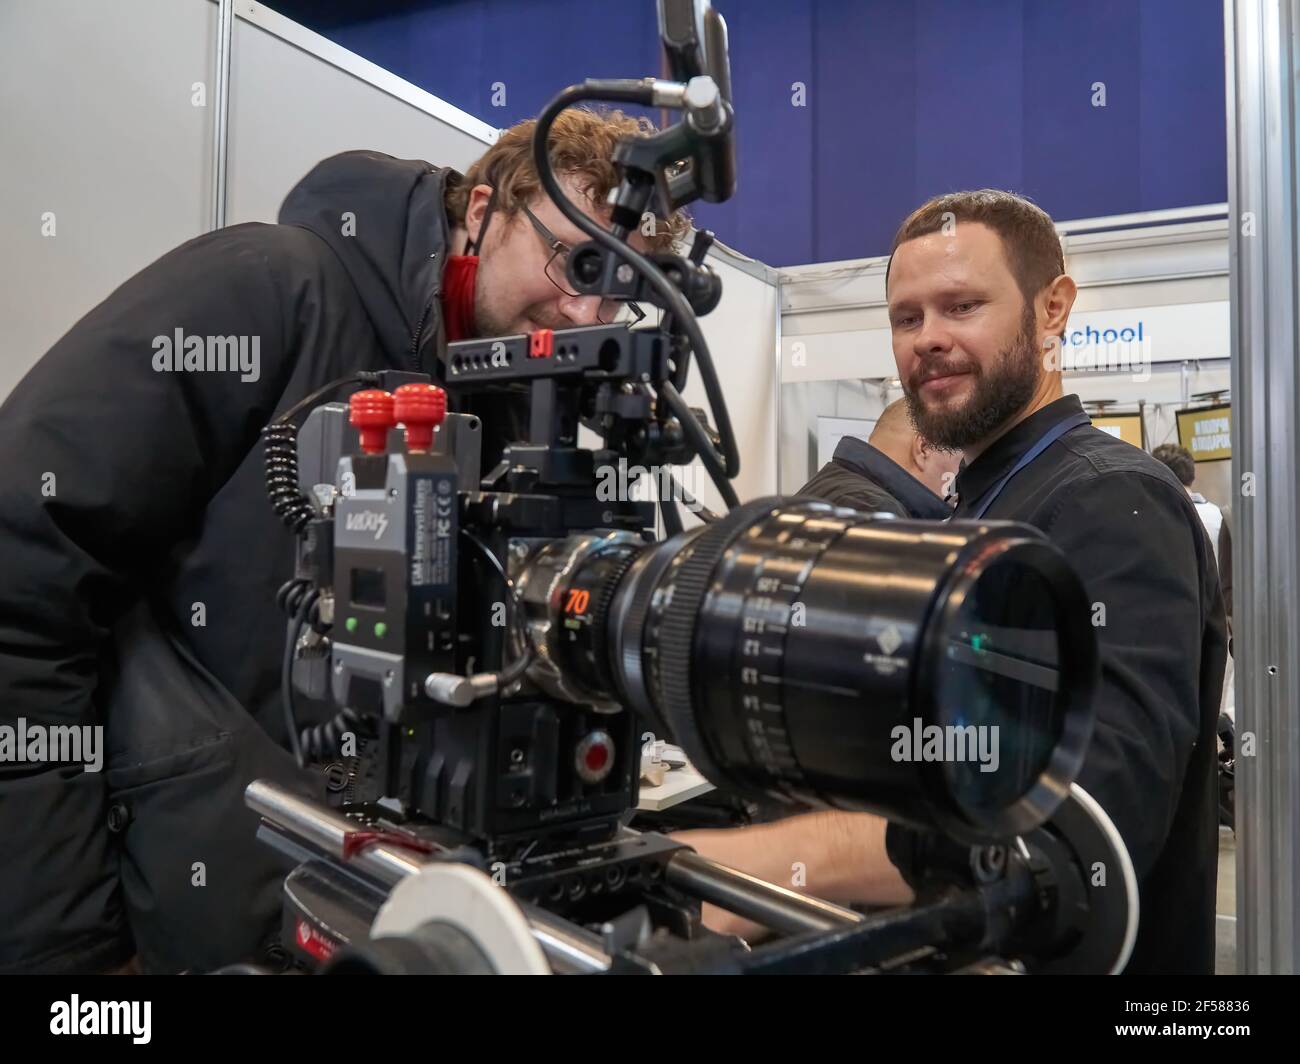 Moscow, Russia. 24th Mar, 2021. Guests looking at a movie camera during the  17th International Exhibition of Equipment, Services and New Technologies  for Film and Television Production CPS 2021 in Moscow.The largest